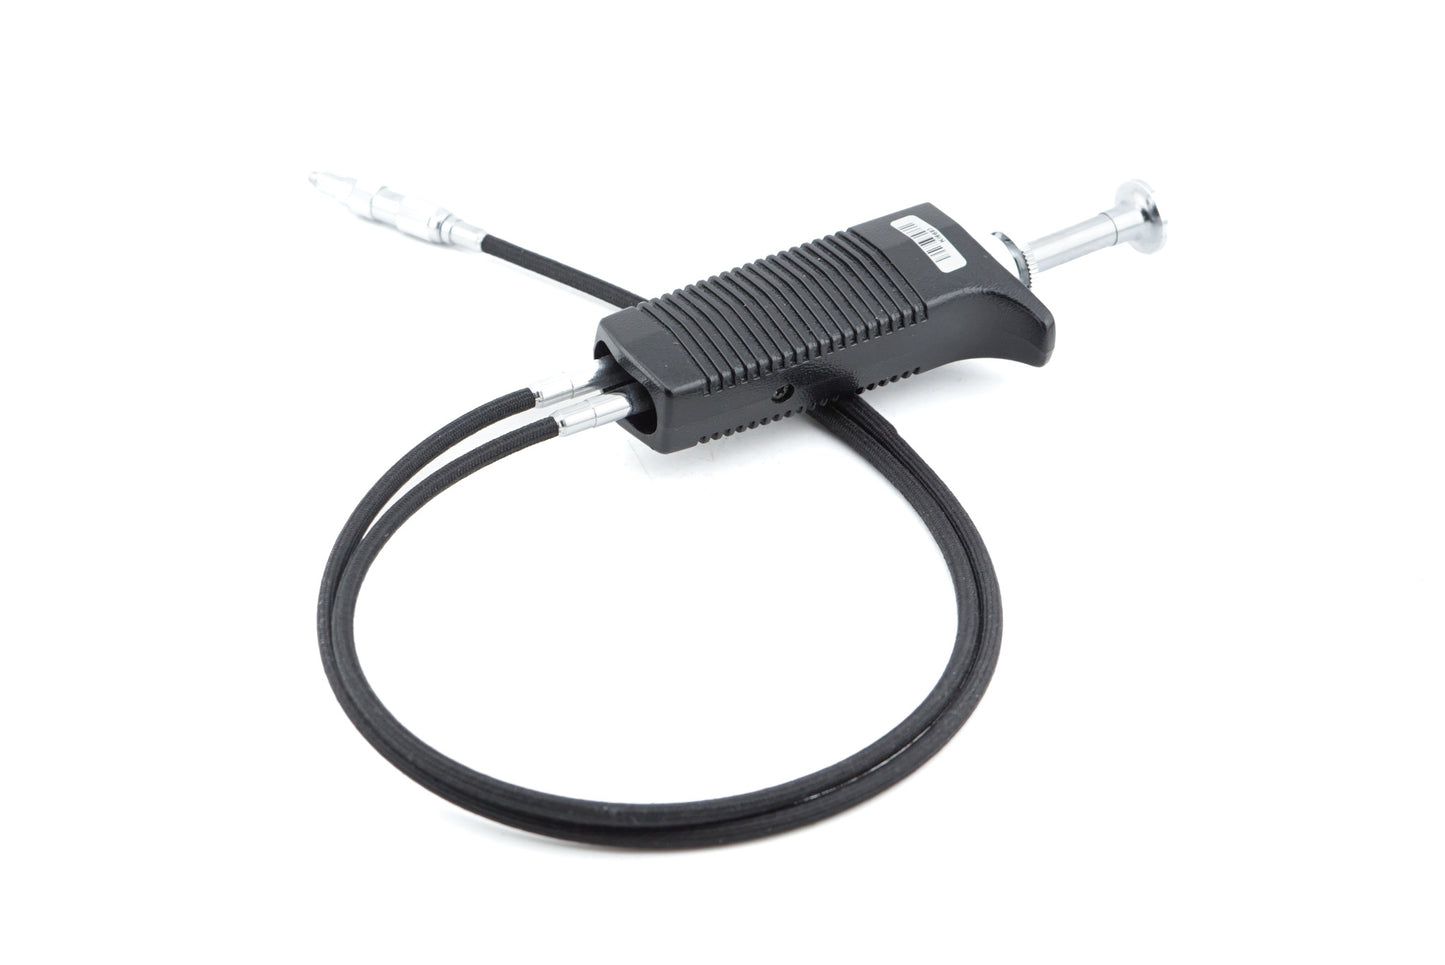 Nikon AR-4 Double Cable Release - Accessory